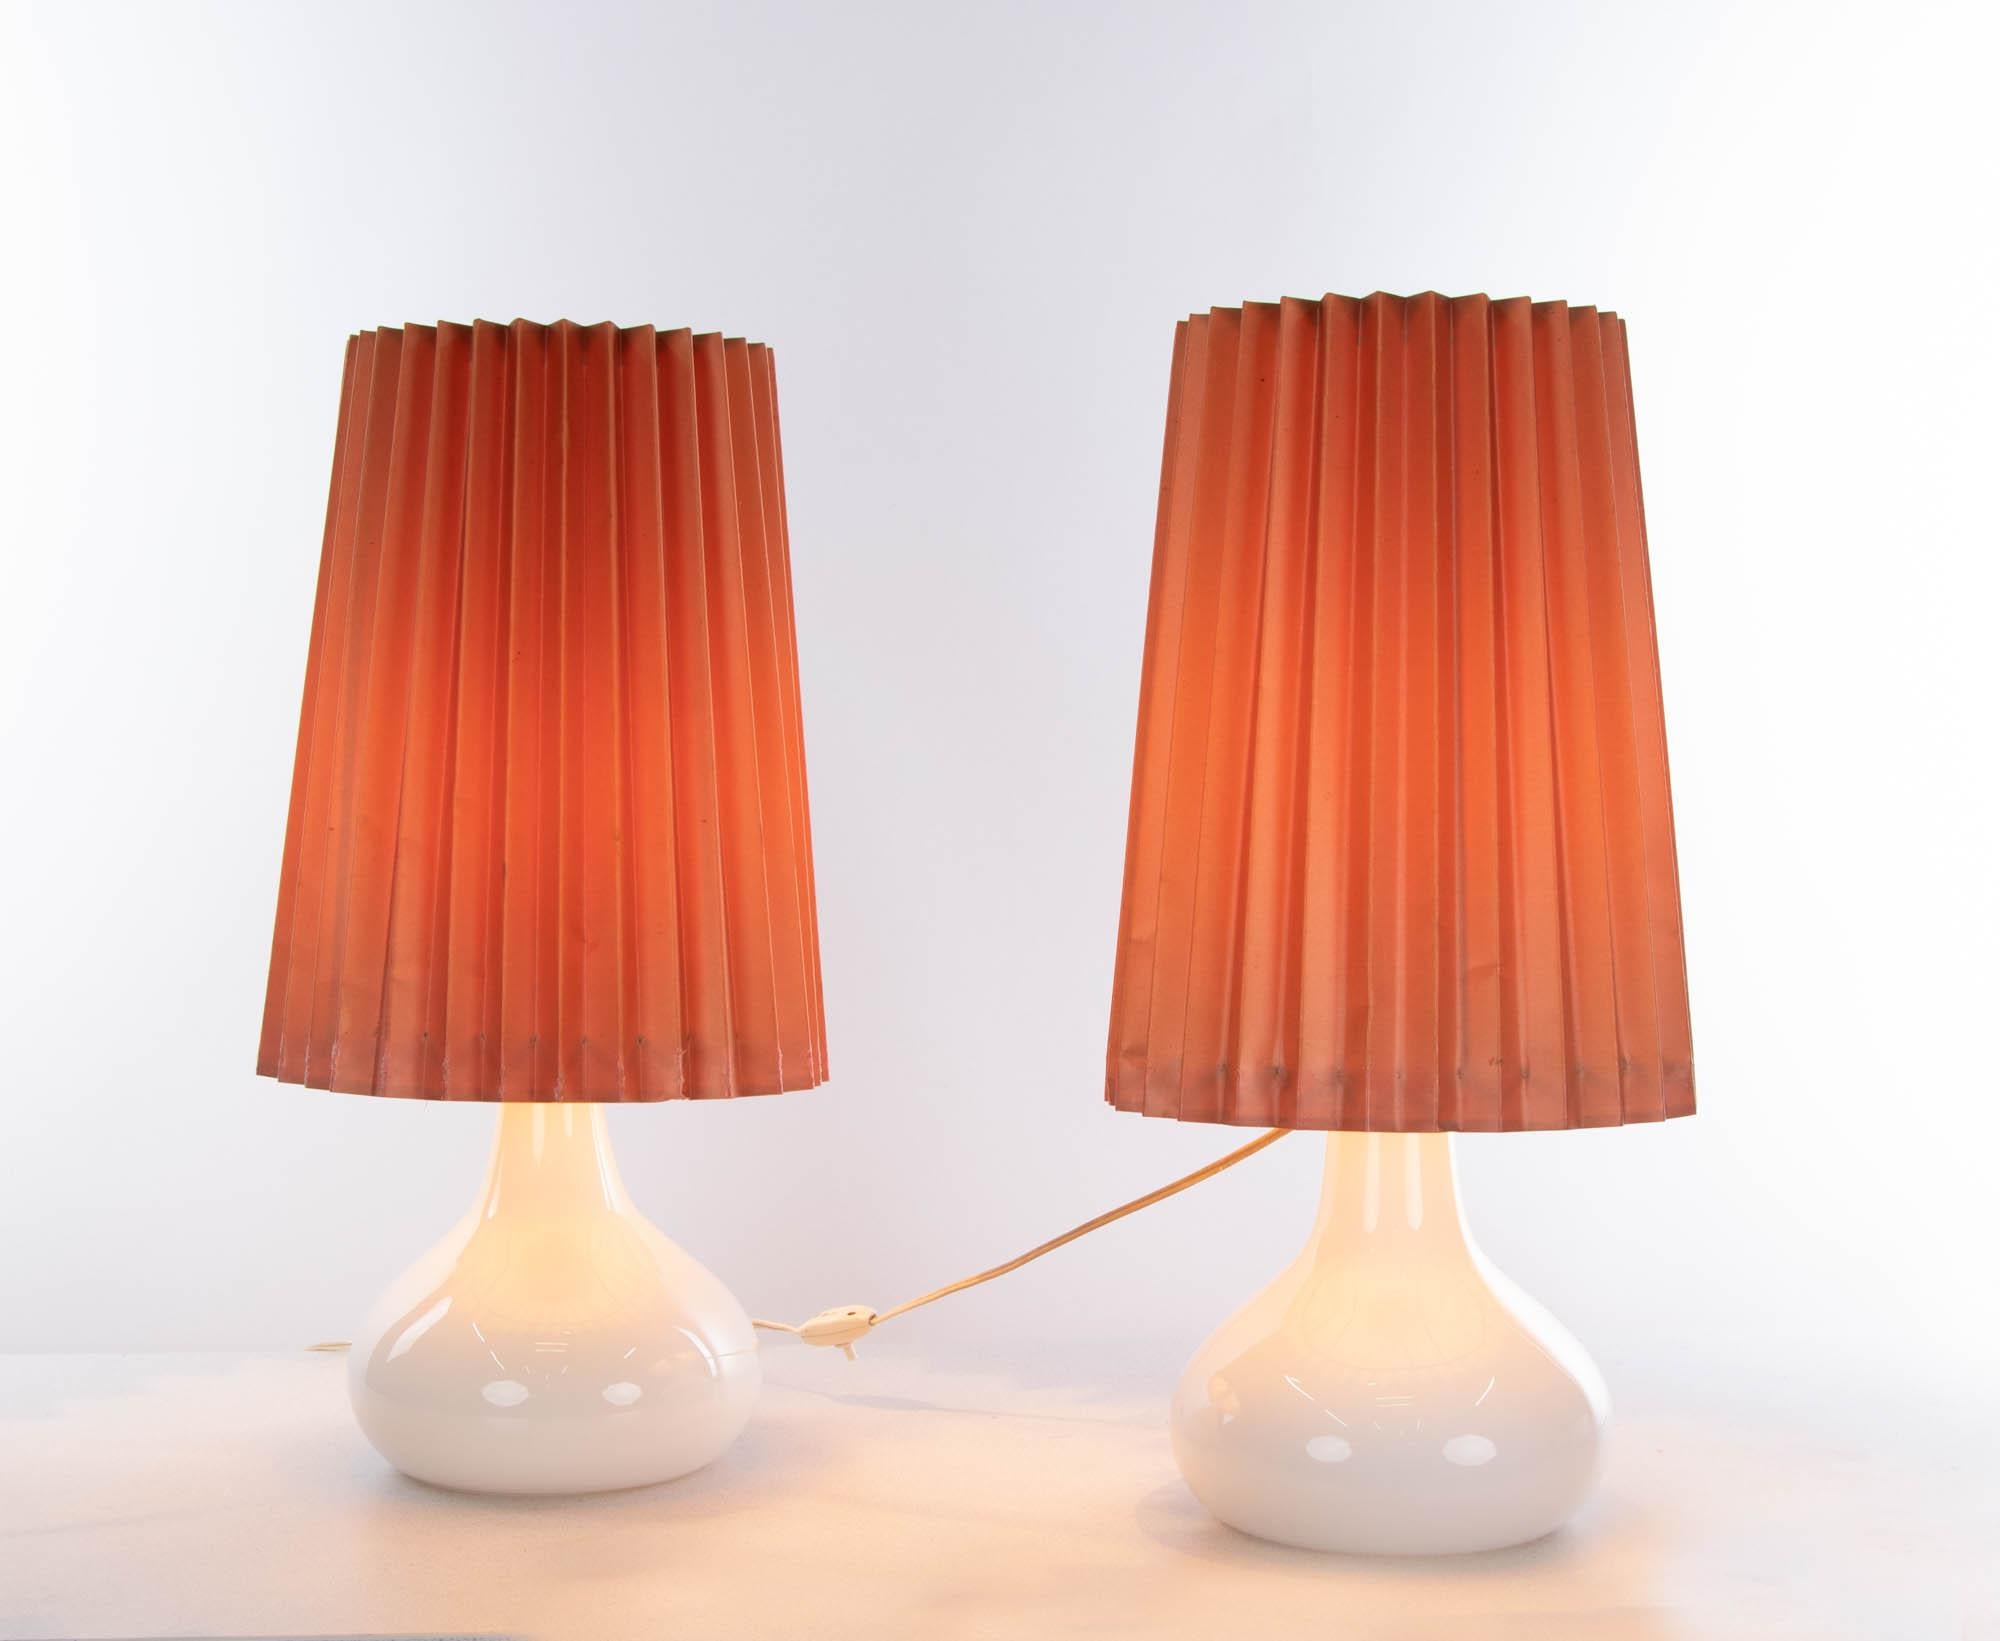 Elegant pair of Opaline glass table lamps designed by Kylle Svanlund. A real eye-catcher and an excellent example of art glass from Scandinavia, Holmegaard, 1960s. 

Measures: height 21.65